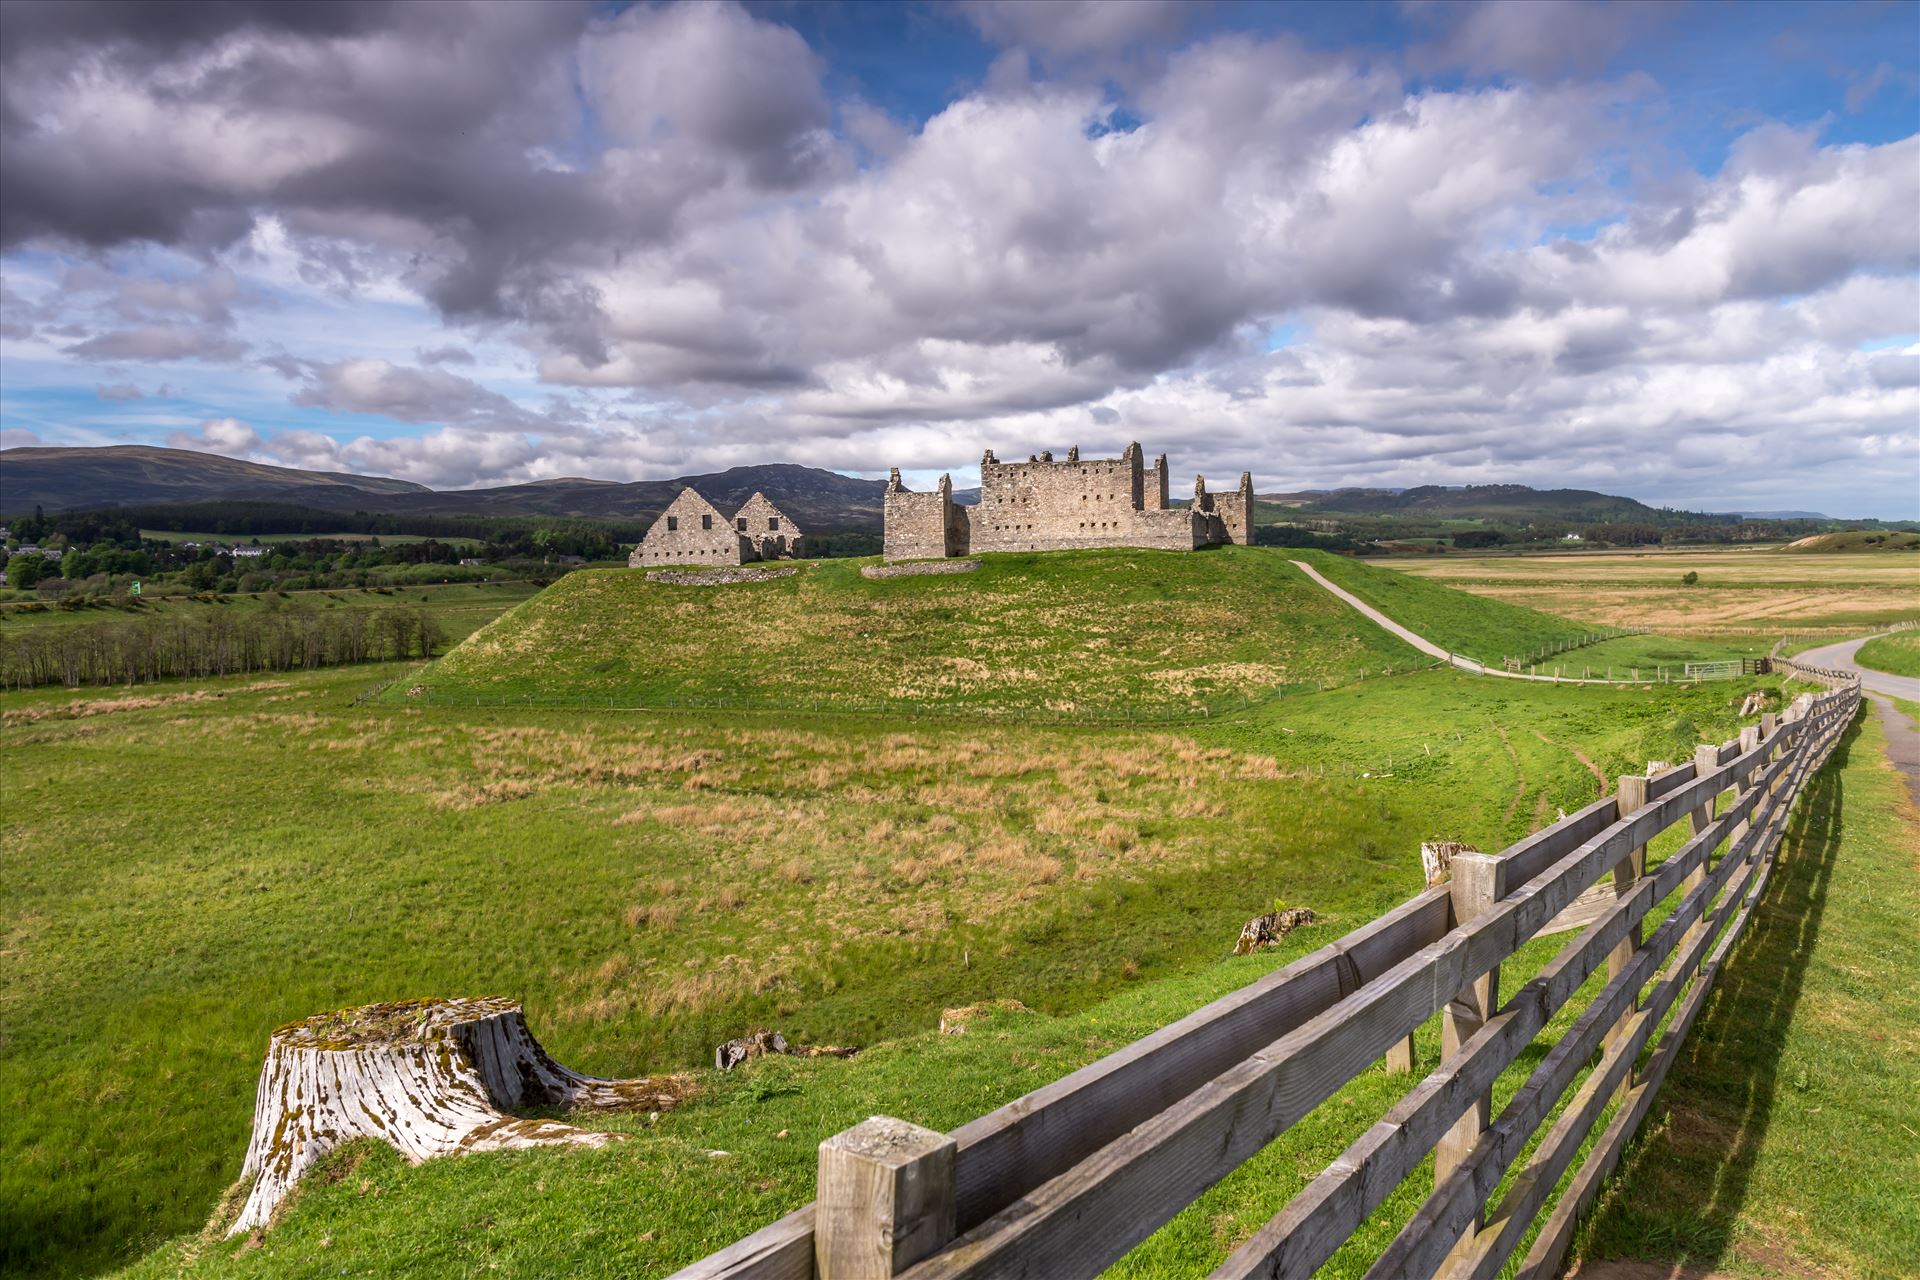 Ruthven Barracks Ruthven Barracks, near Ruthven in Badenoch, Scotland, are the smallest but best preserved of the four barracks built in 1719 after the 1715 Jacobite rising. by philreay